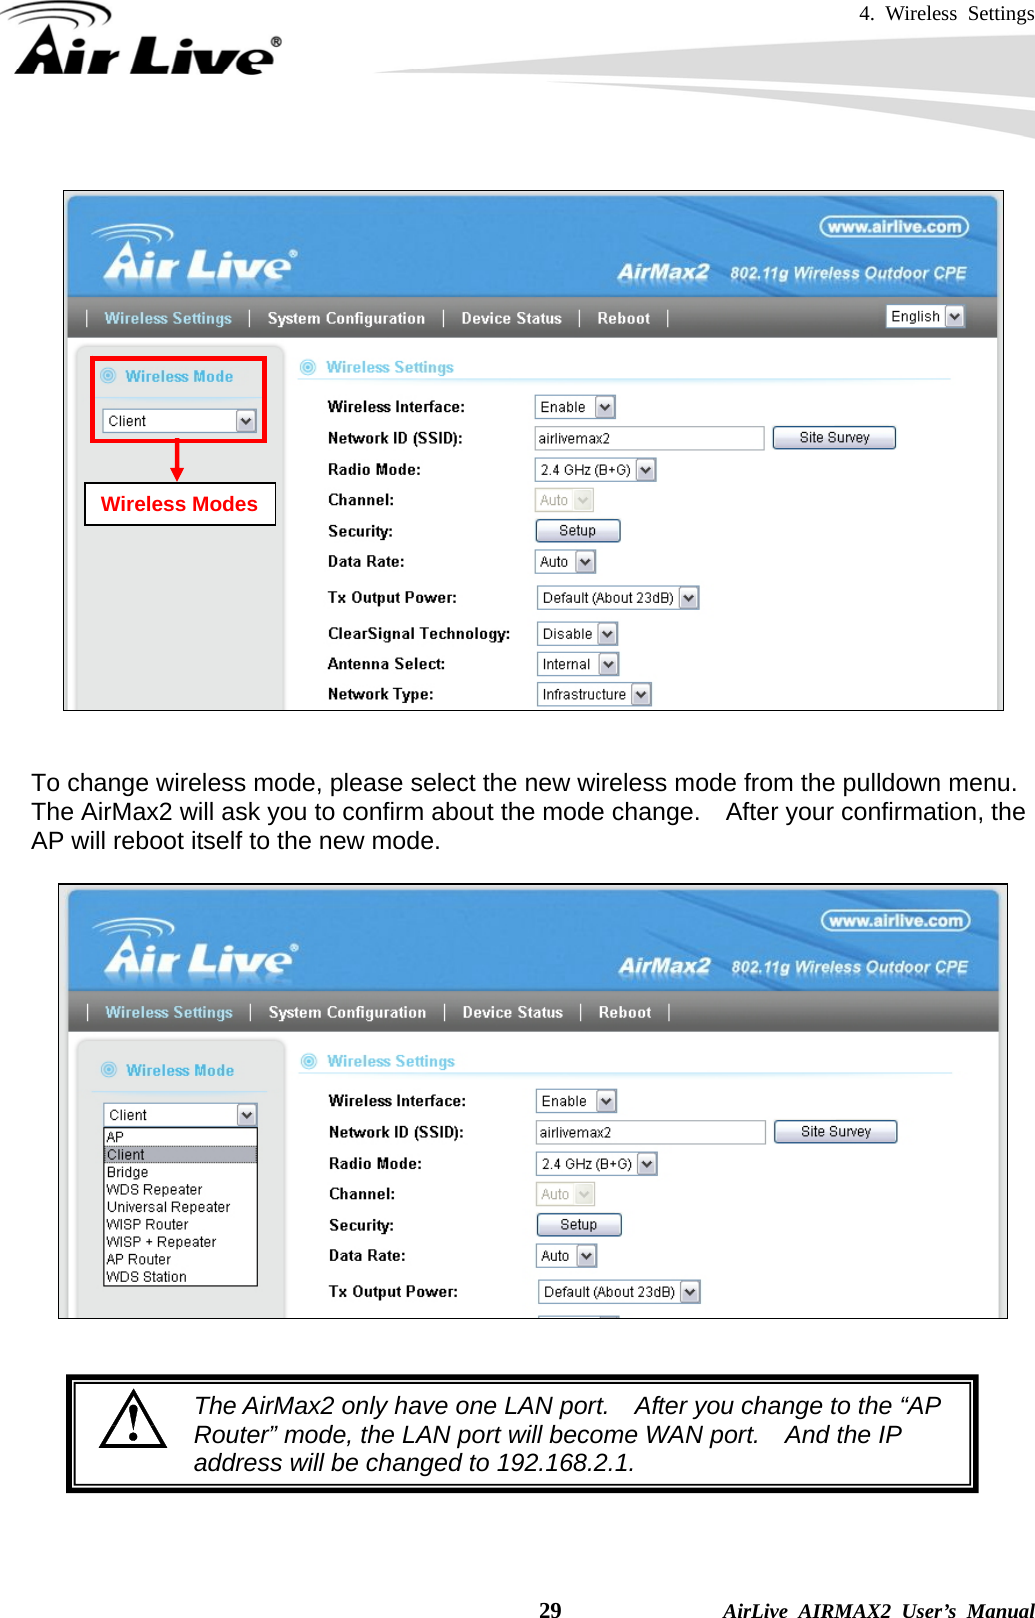 4. Wireless Settings    29              AirLive AIRMAX2 User’s Manual     To change wireless mode, please select the new wireless mode from the pulldown menu.   The AirMax2 will ask you to confirm about the mode change.    After your confirmation, the AP will reboot itself to the new mode.              Wireless Modes The AirMax2 only have one LAN port.    After you change to the “AP Router” mode, the LAN port will become WAN port.    And the IP address will be changed to 192.168.2.1.